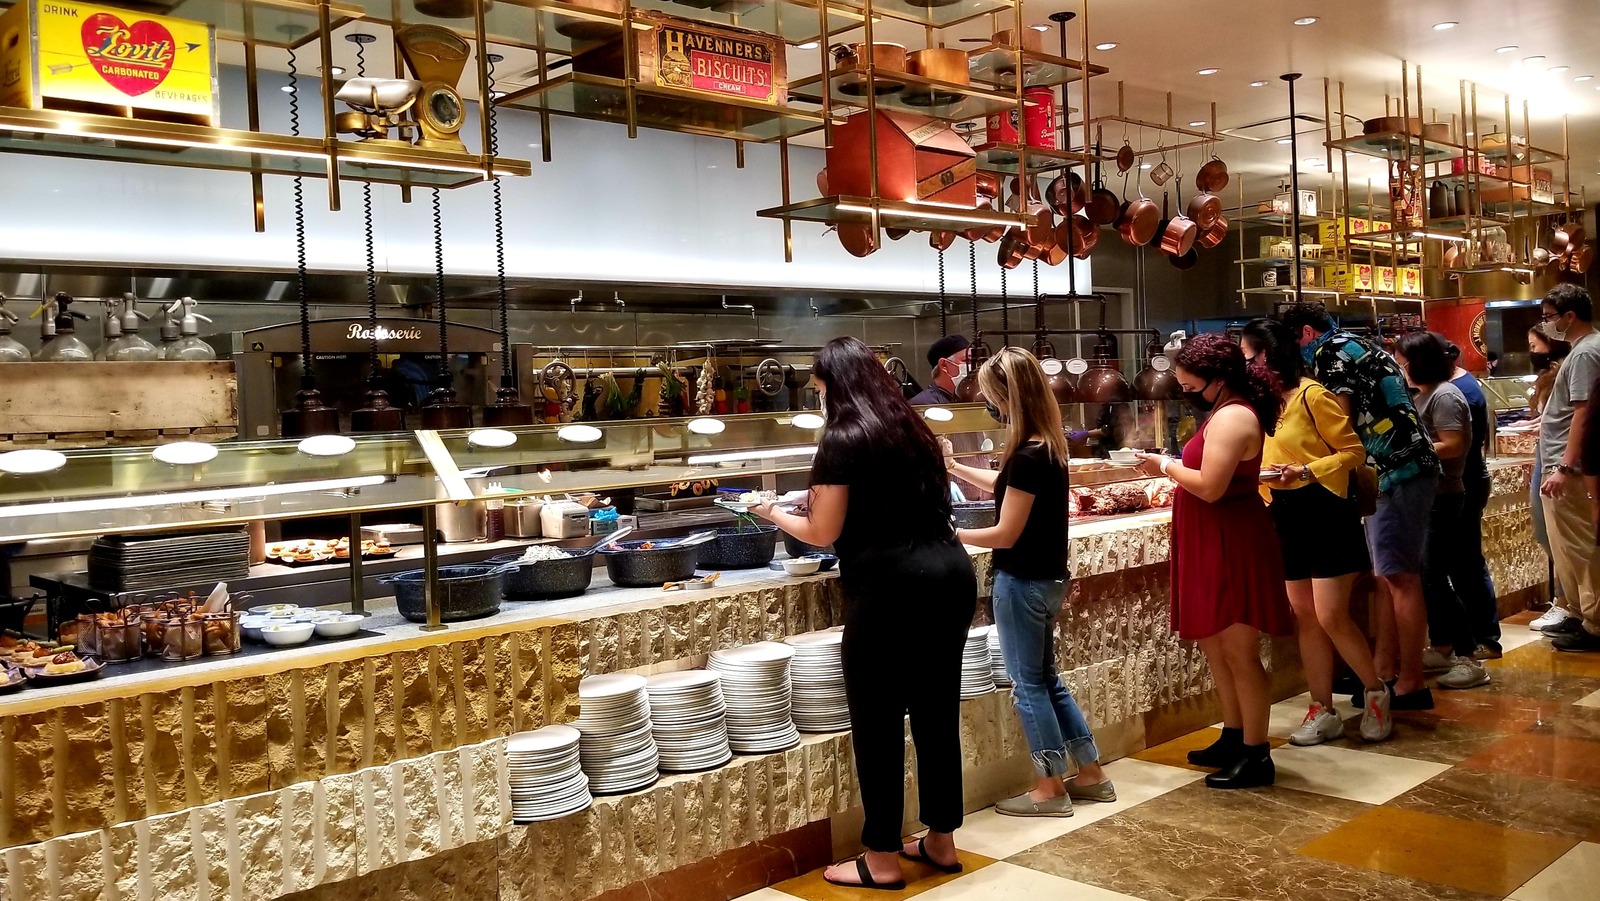 Bacchanal Buffet Review: Price, Photos, And Menu For 2023